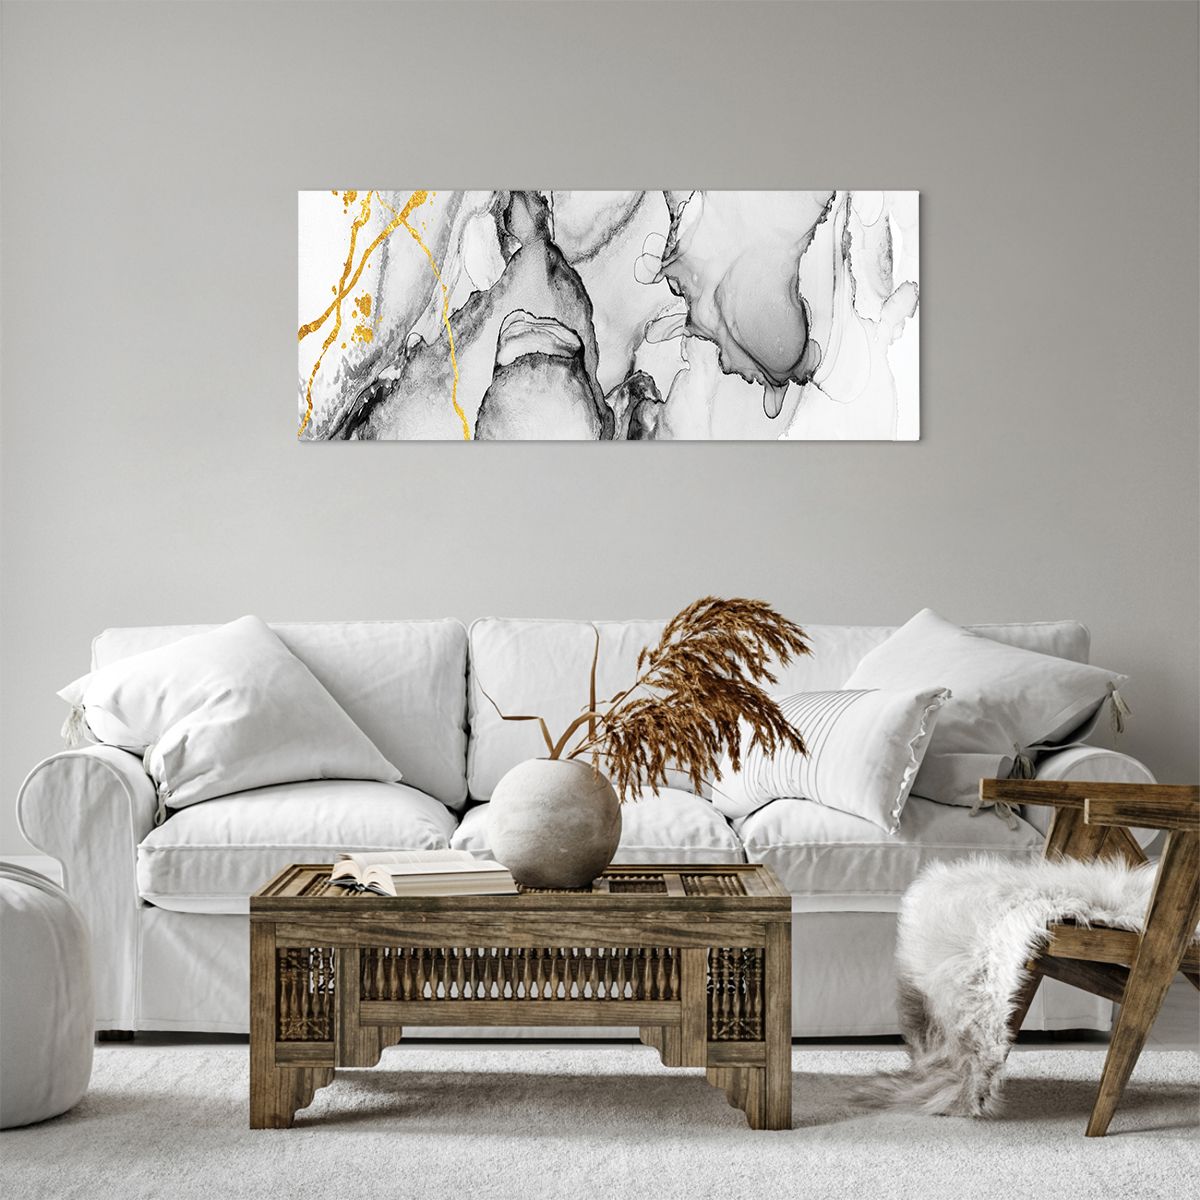 Canvas picture Abstraction, Canvas picture Art, Canvas picture Modern Art, Canvas picture Artistic Art, Canvas picture Modern Art.